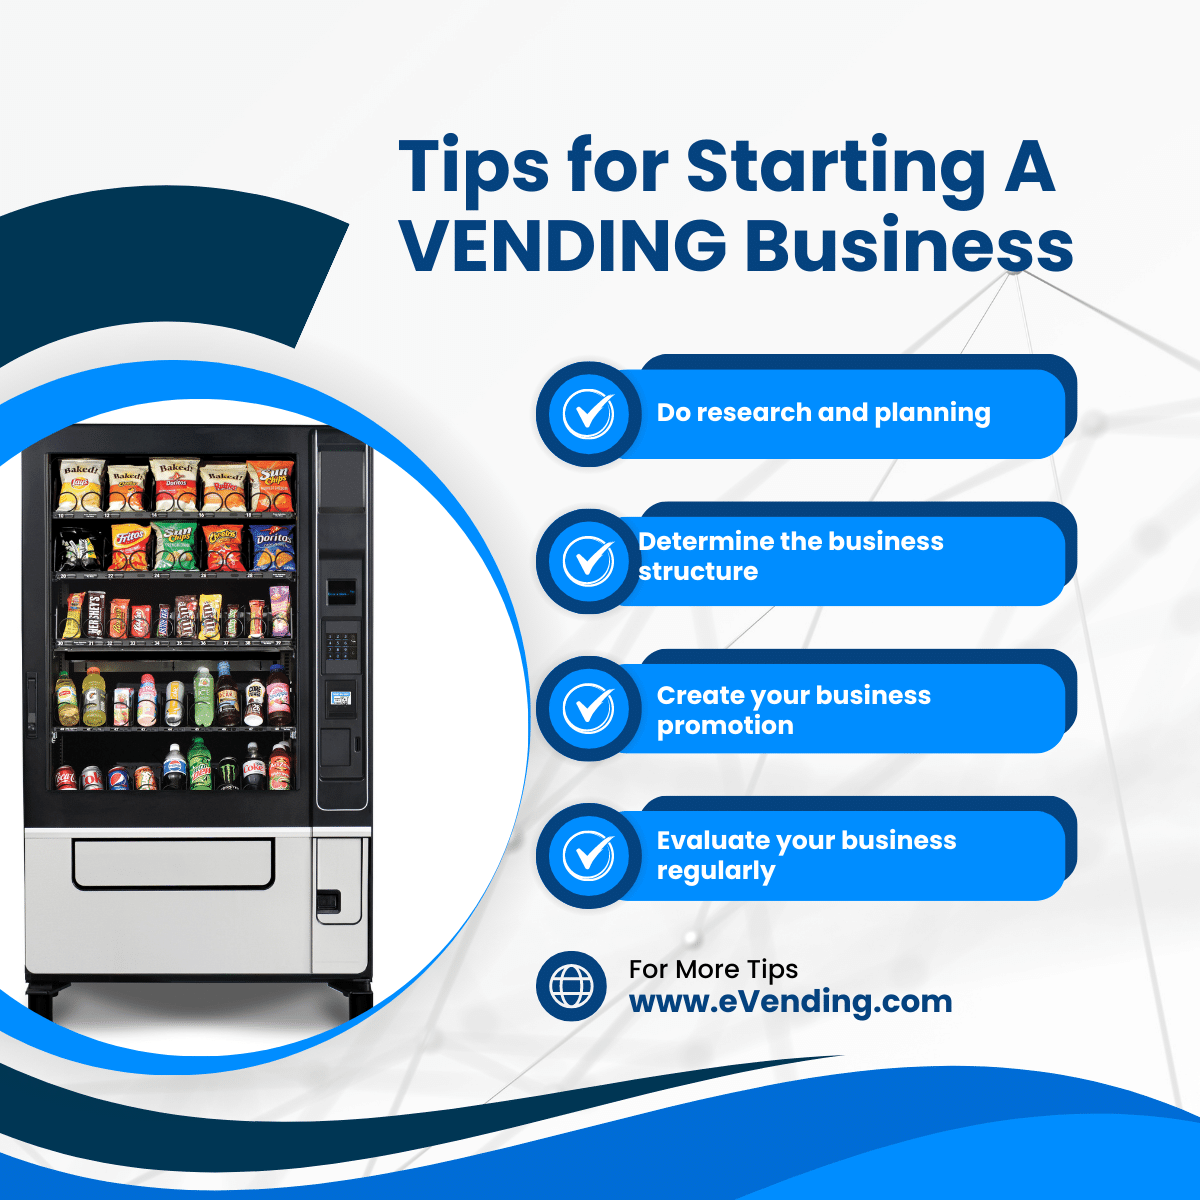 ARE YOU HAVING PROBLEMS FINDING VENDING MACHINES FOR SALE?